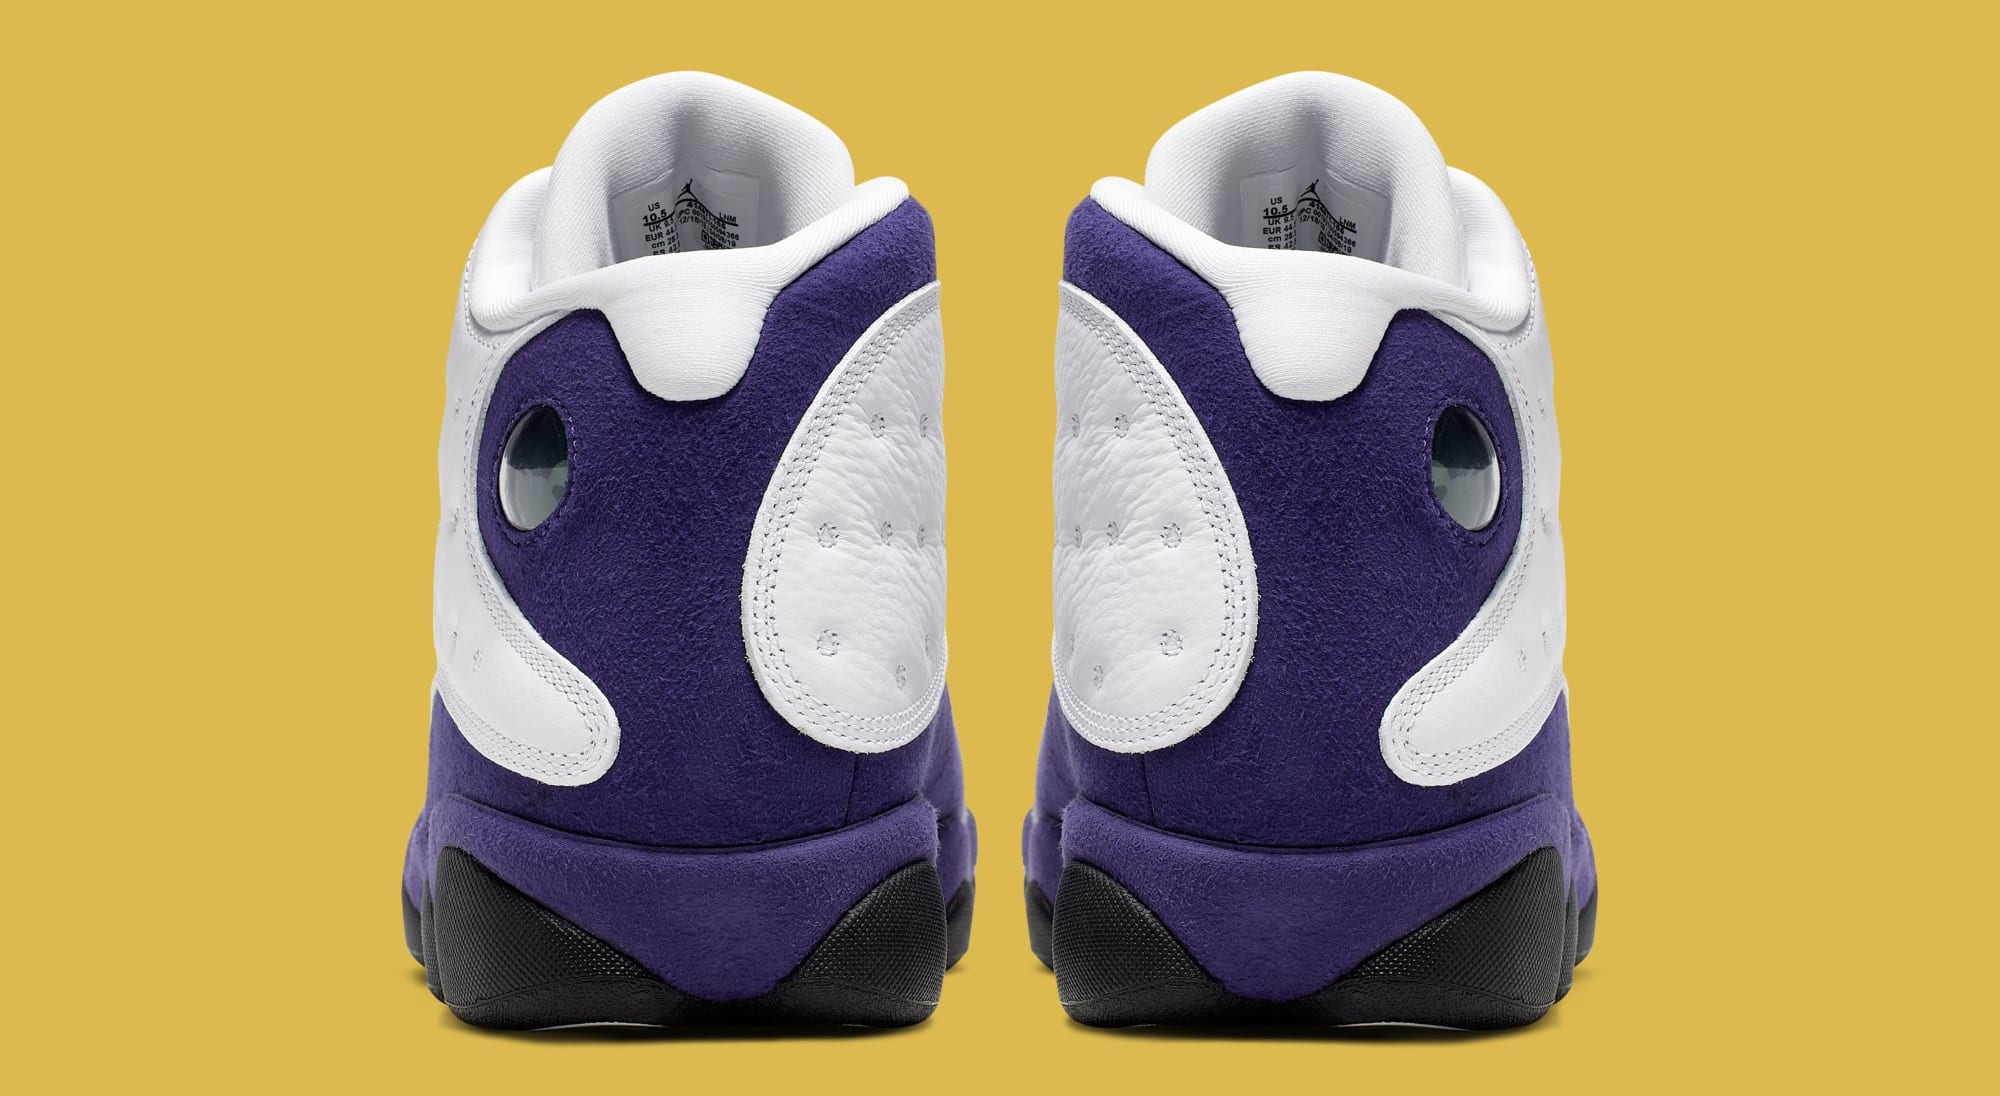 JOrdan Laker 13s matches tee collection created to go wit the laker 13s  perfectly